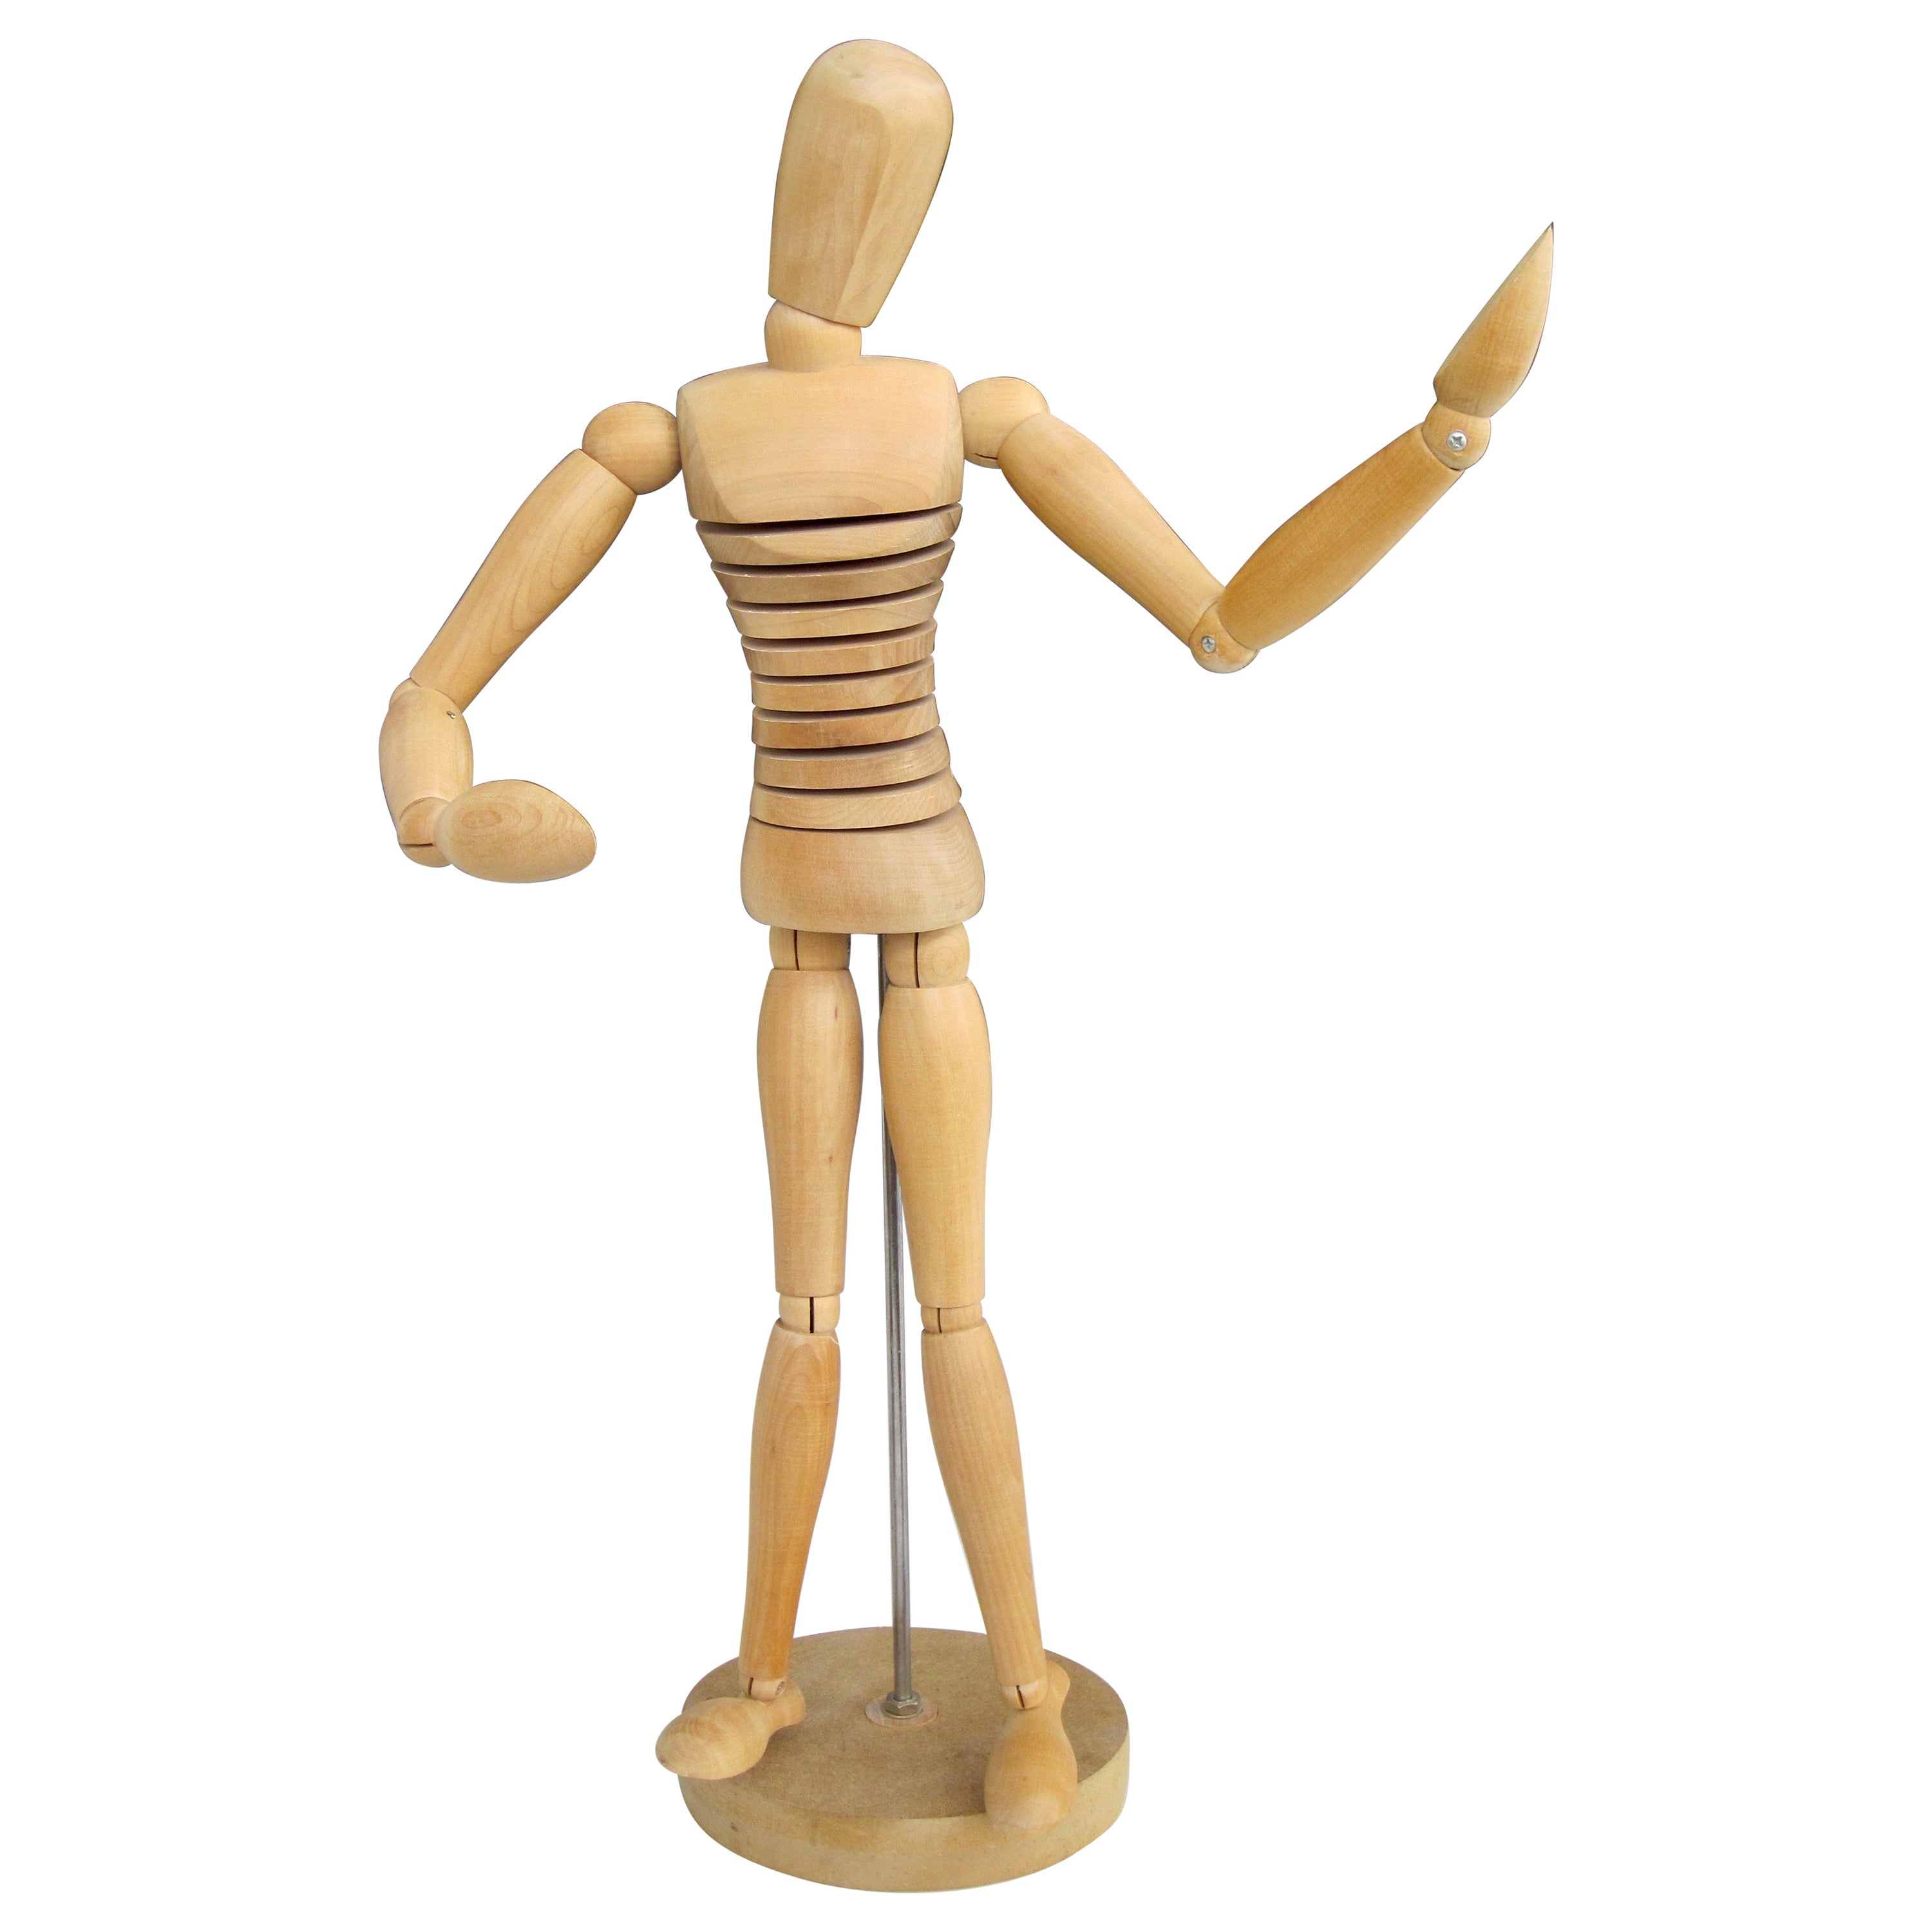 Posable Jointed Wooden Human Figure Artist Mannequin